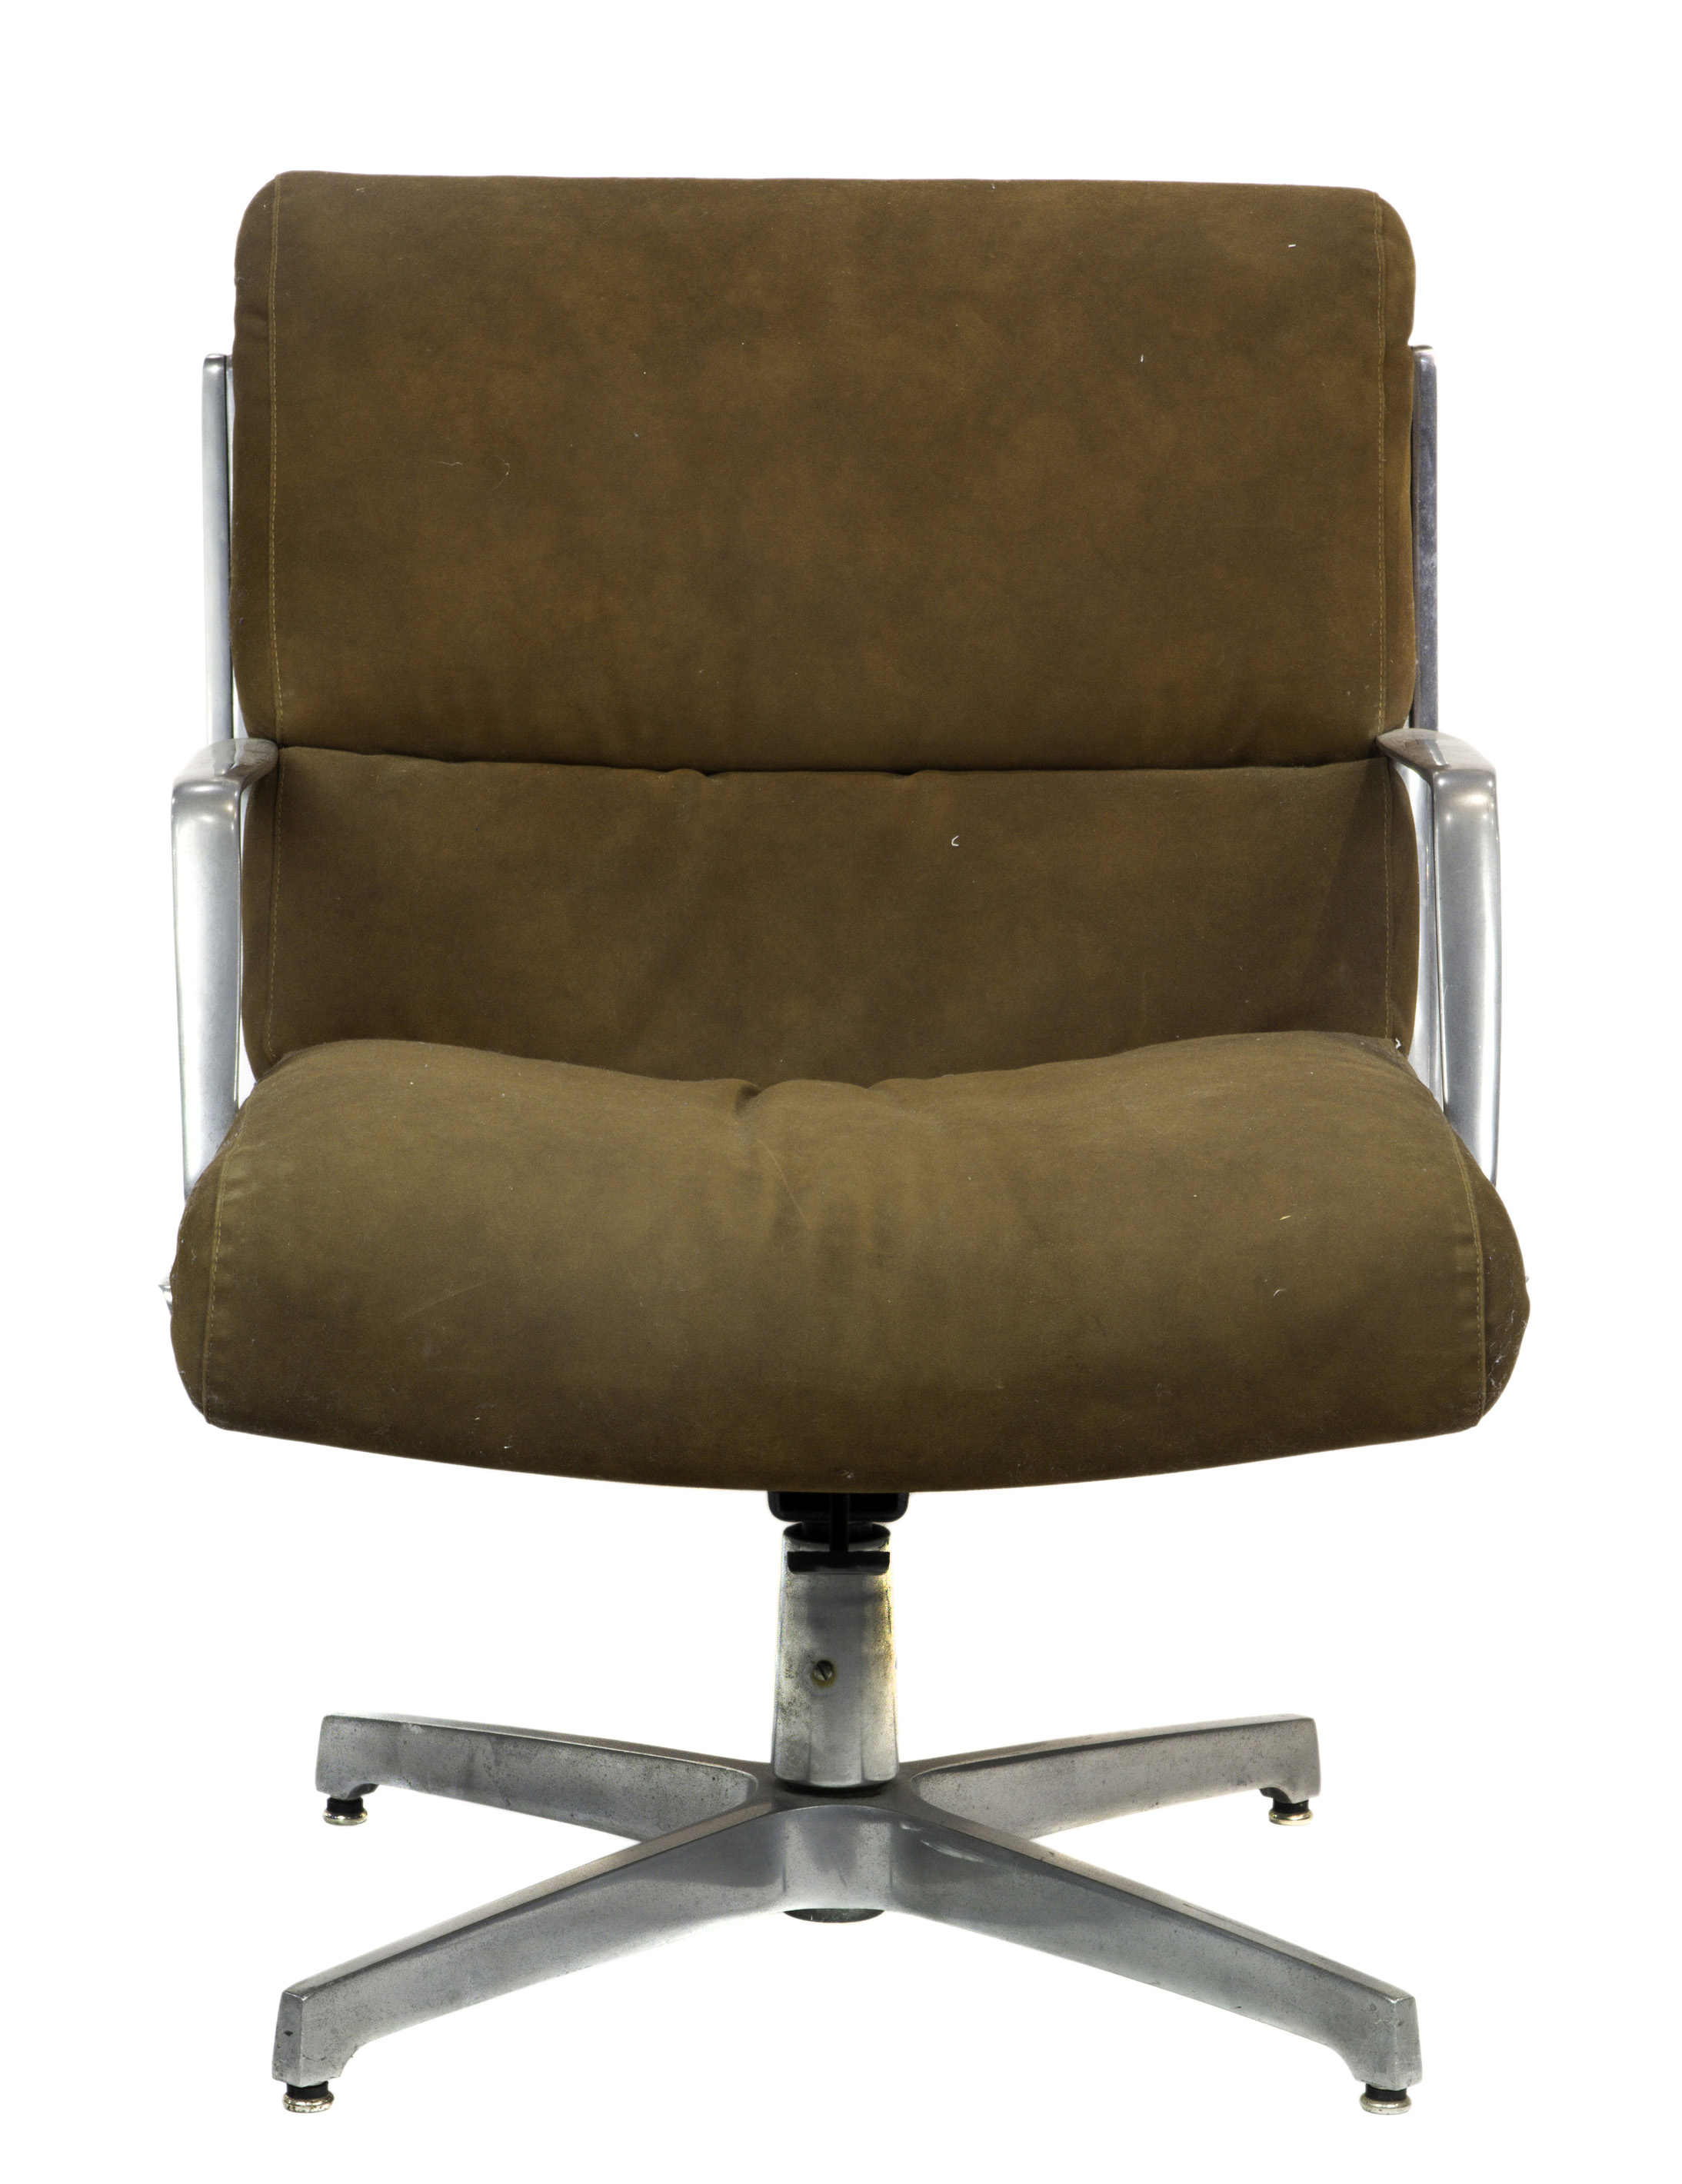 A KNOLL STYLE SUEDE EXECUTIVE CHAIR